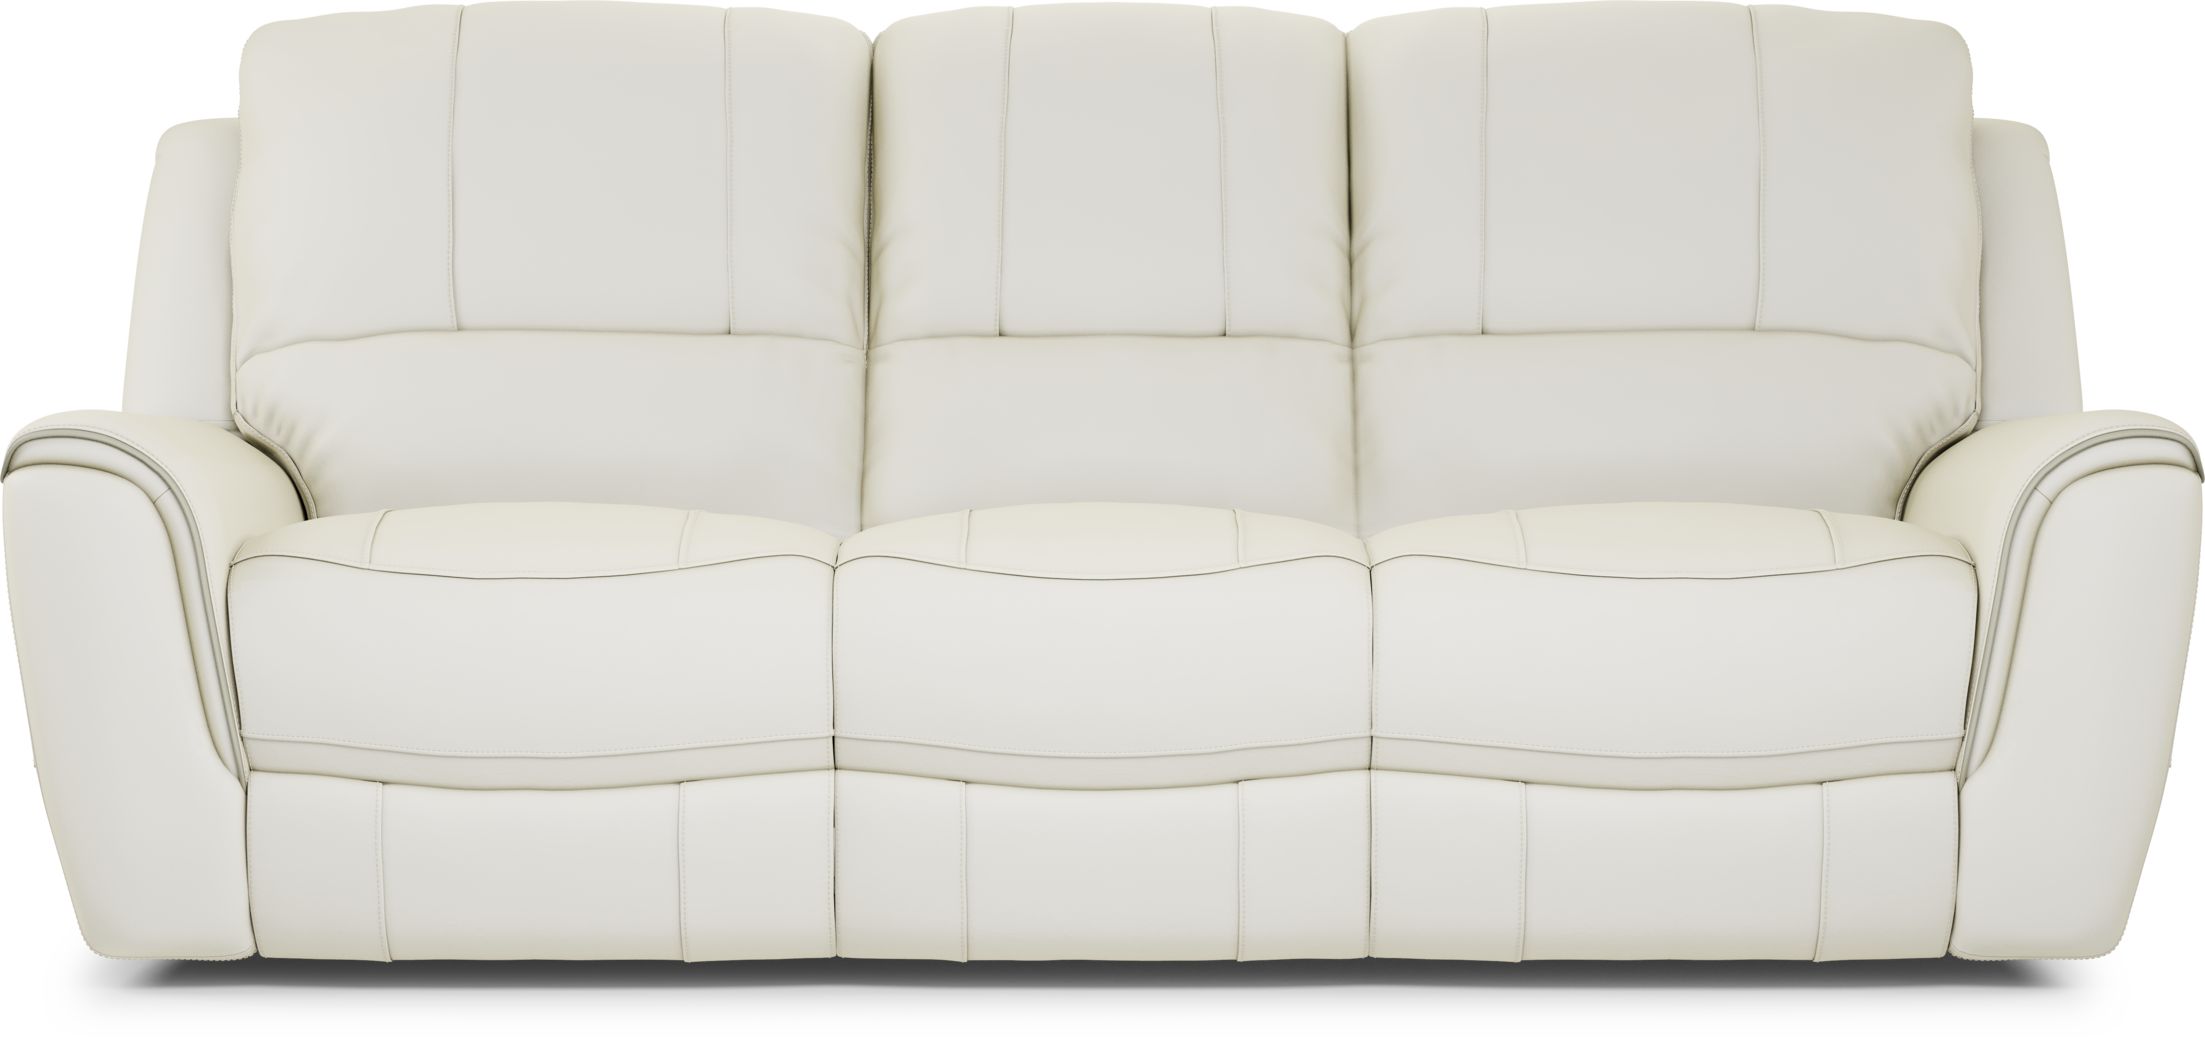 rooms to go leather reclining sofa